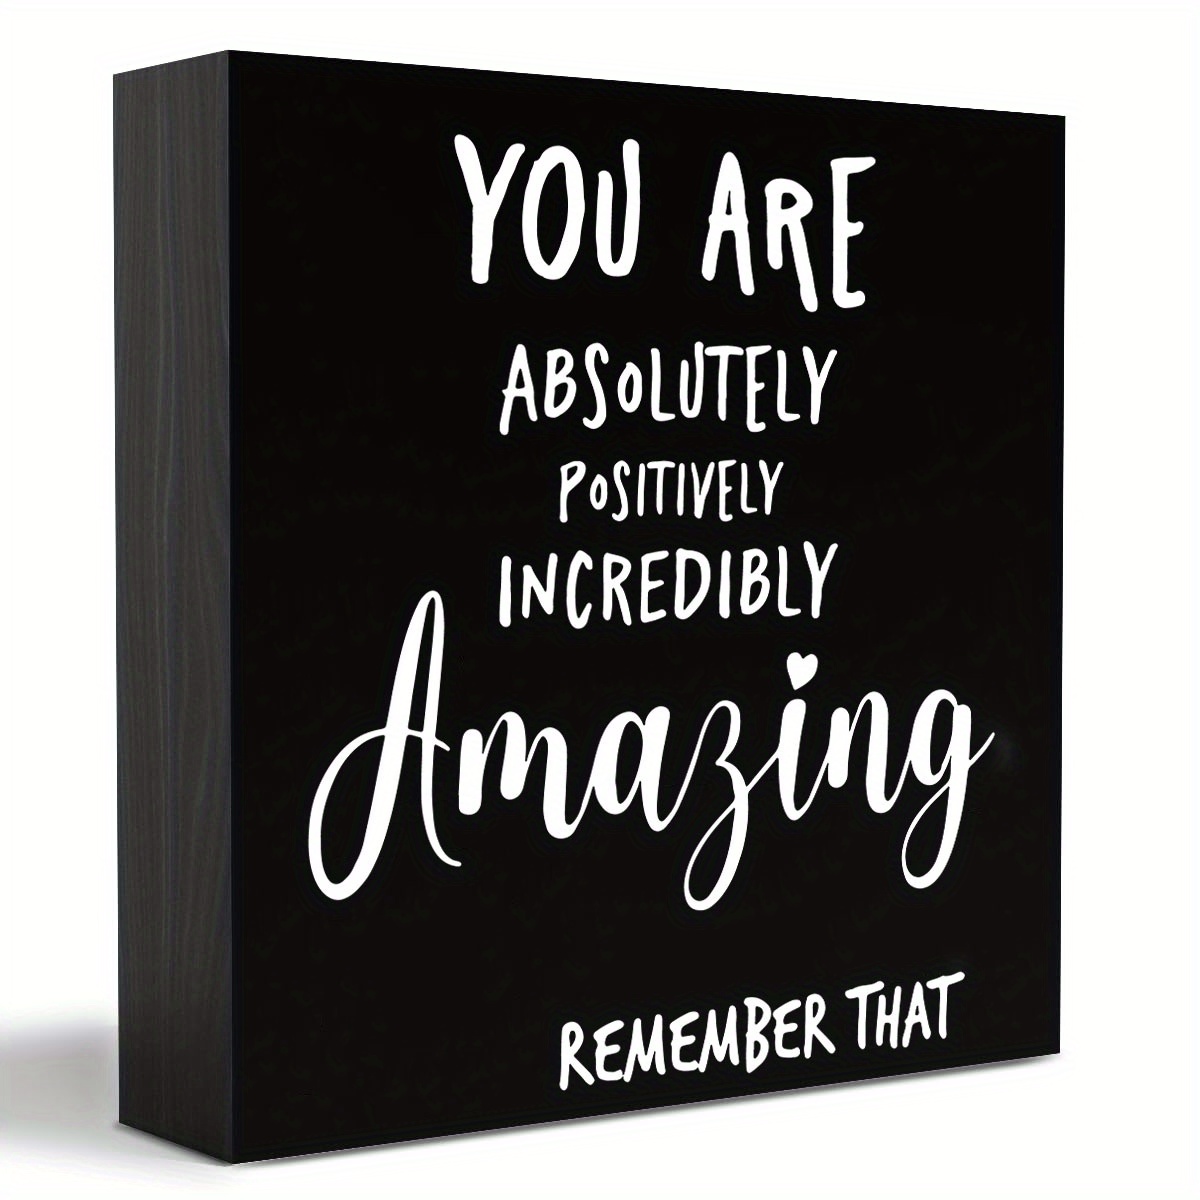 

1pc You Are Amazing Remember That Wooden Box Sign, Positive Uplifting Quote Wood Sign Decor Wooden Block Sign Decoration For Home Office Shelf Desk